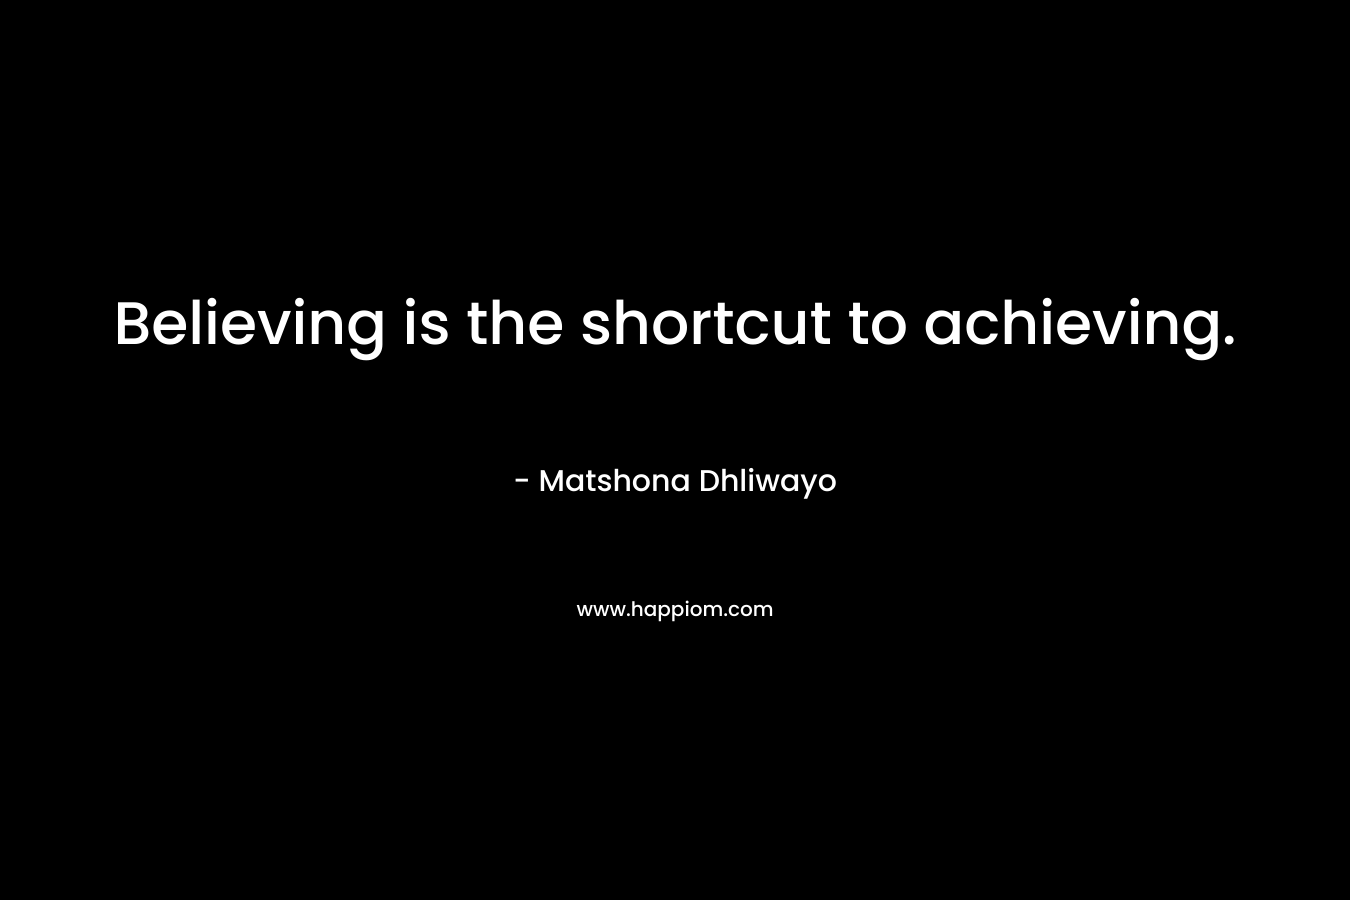 Believing is the shortcut to achieving.